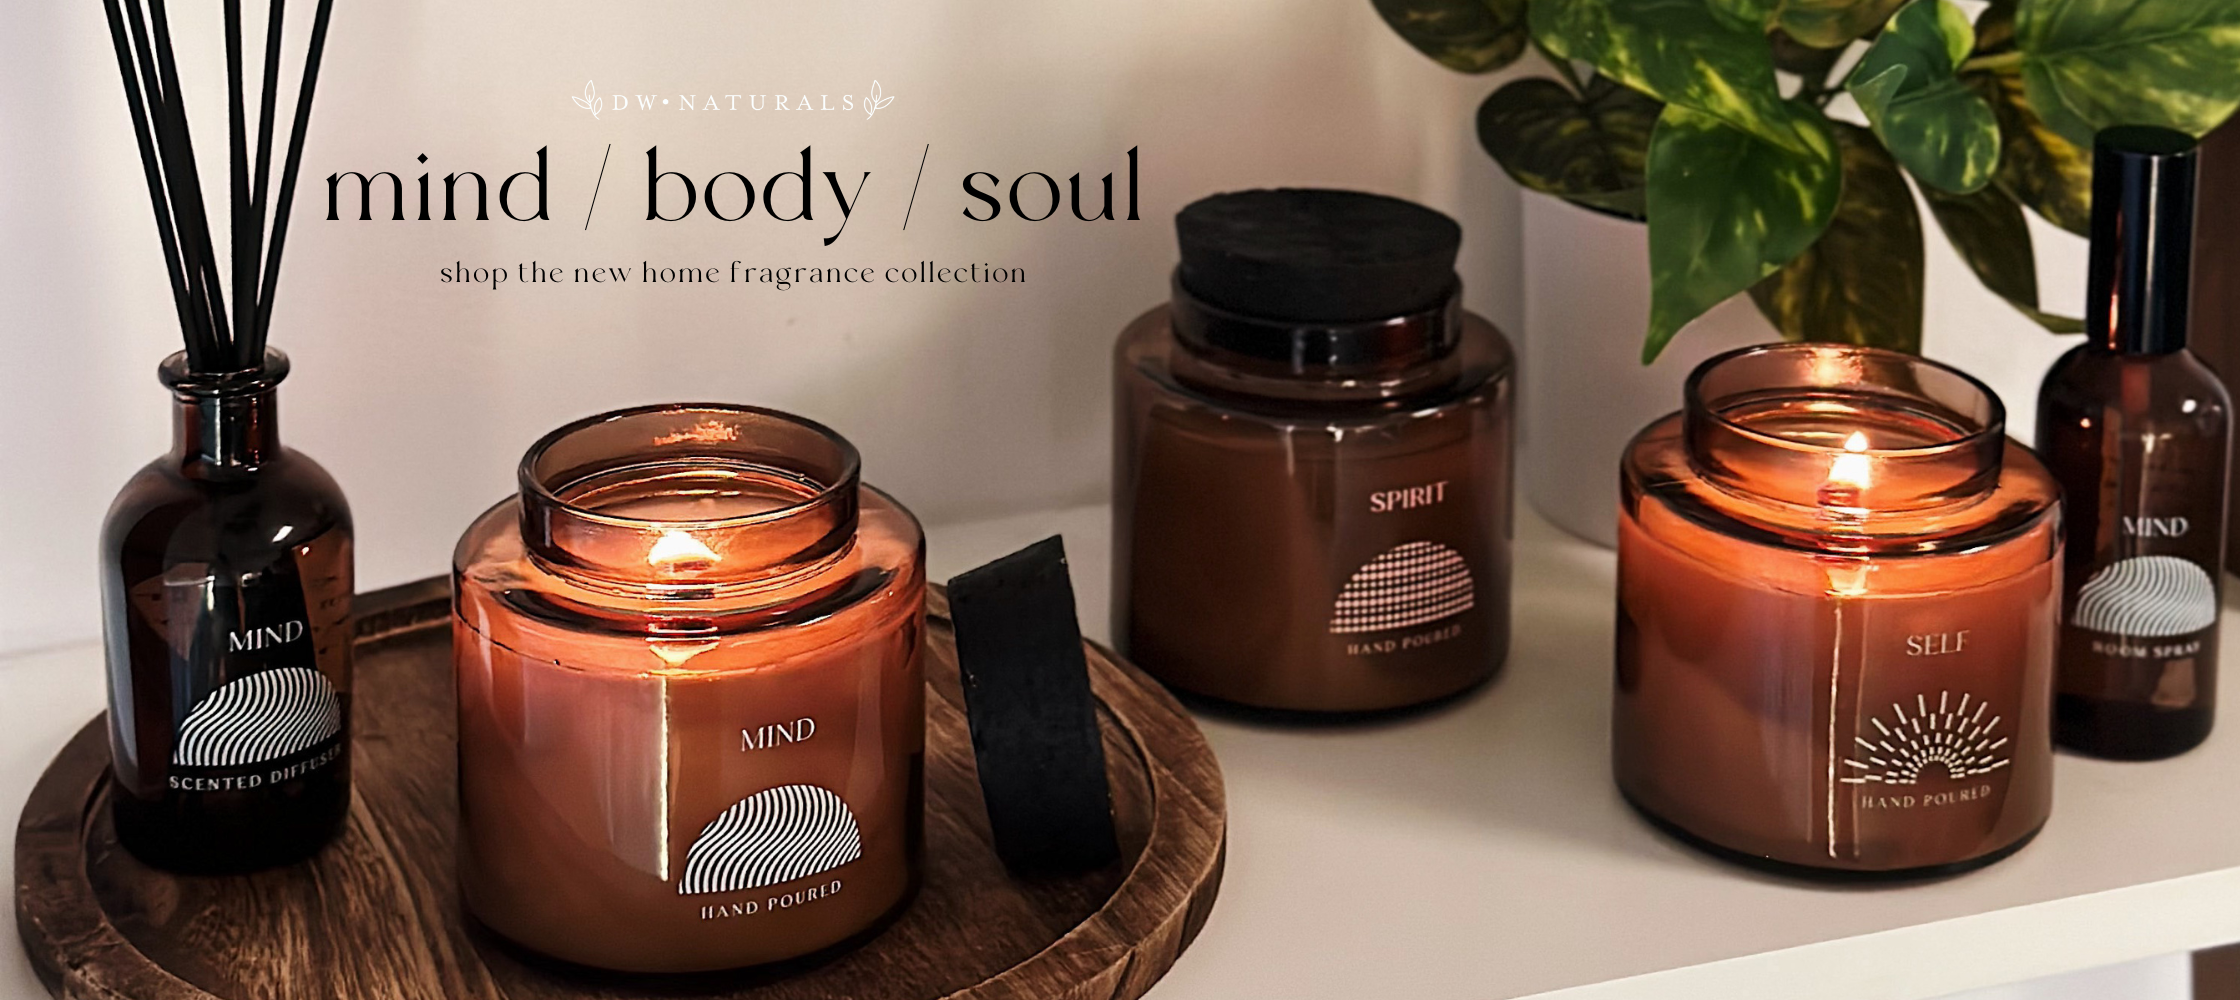 DW Naturals, mind, body, soul collection banner image